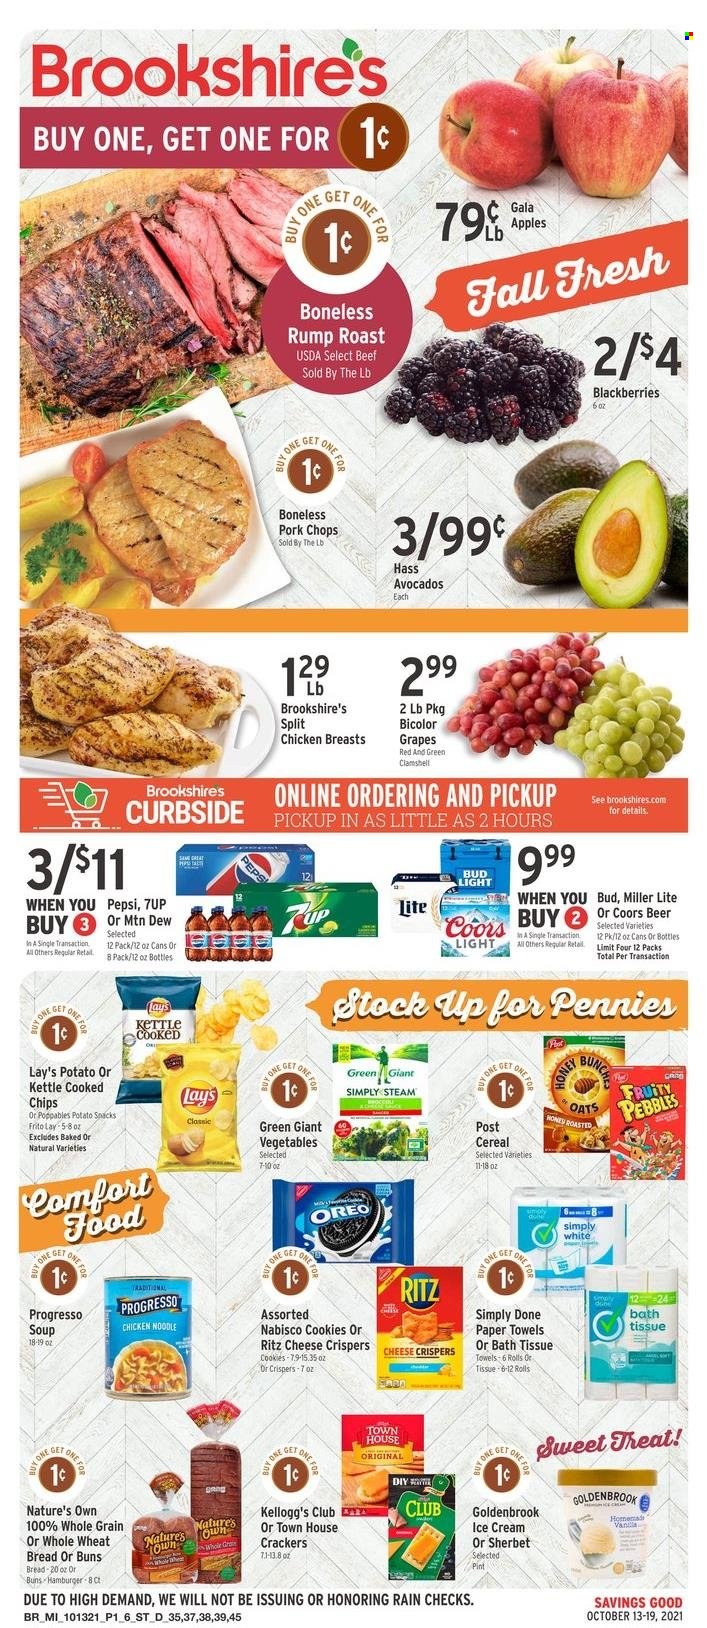 thumbnail - Brookshires Flyer - 10/13/2021 - 10/19/2021 - Sales products - wheat bread, buns, apples, avocado, blackberries, Gala, grapes, hamburger, noodles, Progresso, Oreo, ice cream, cookies, snack, crackers, Kellogg's, RITZ, chips, Lay’s, oats, cereals, Fruity Pebbles, Mountain Dew, Pepsi, 7UP, beer, Bud Light, chicken breasts, pork chops, pork meat, bath tissue, kitchen towels, paper towels, Nature's Own, Miller Lite, Coors. Page 1.